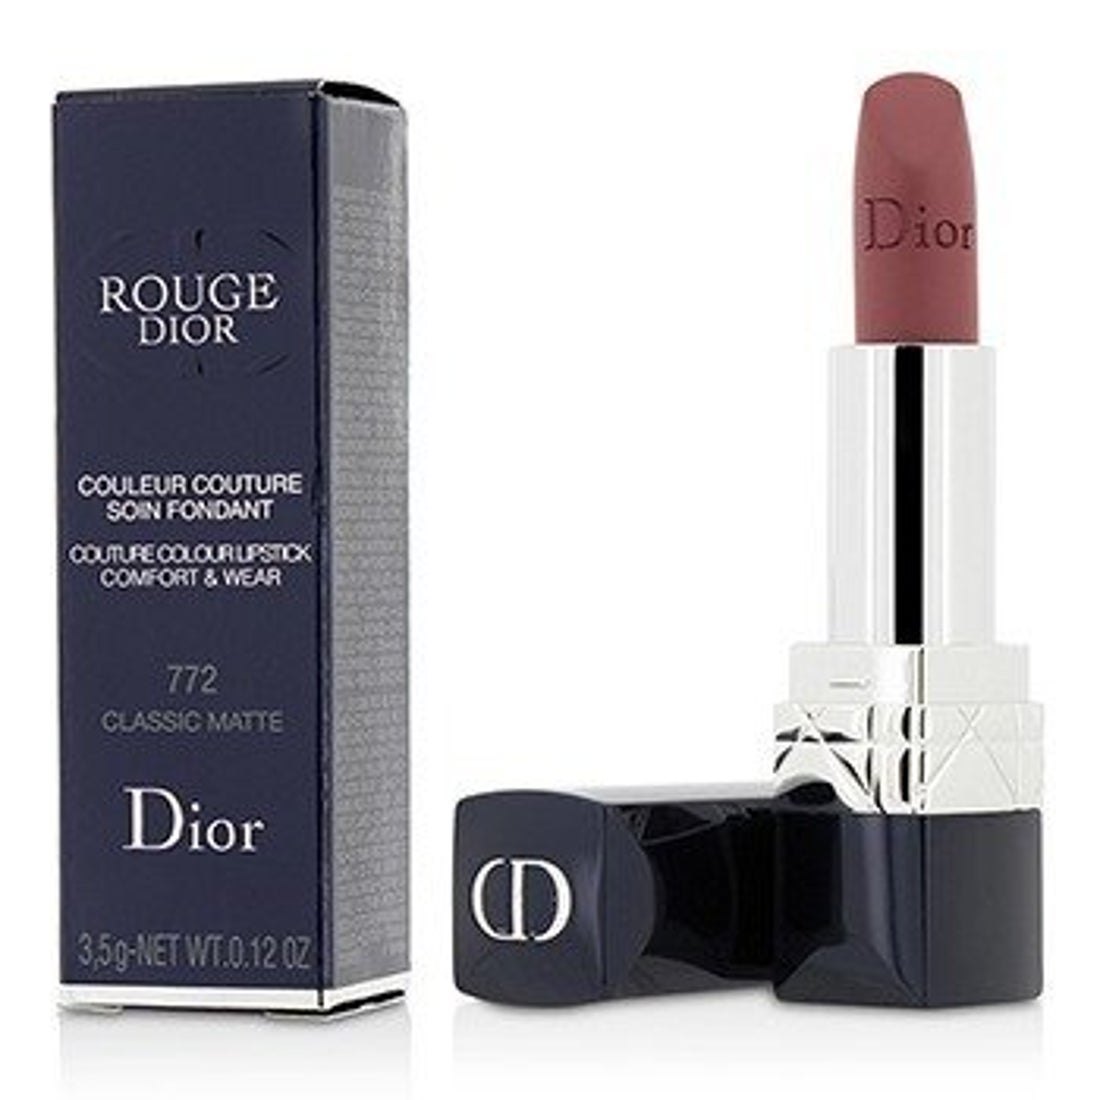 rouge dior 772